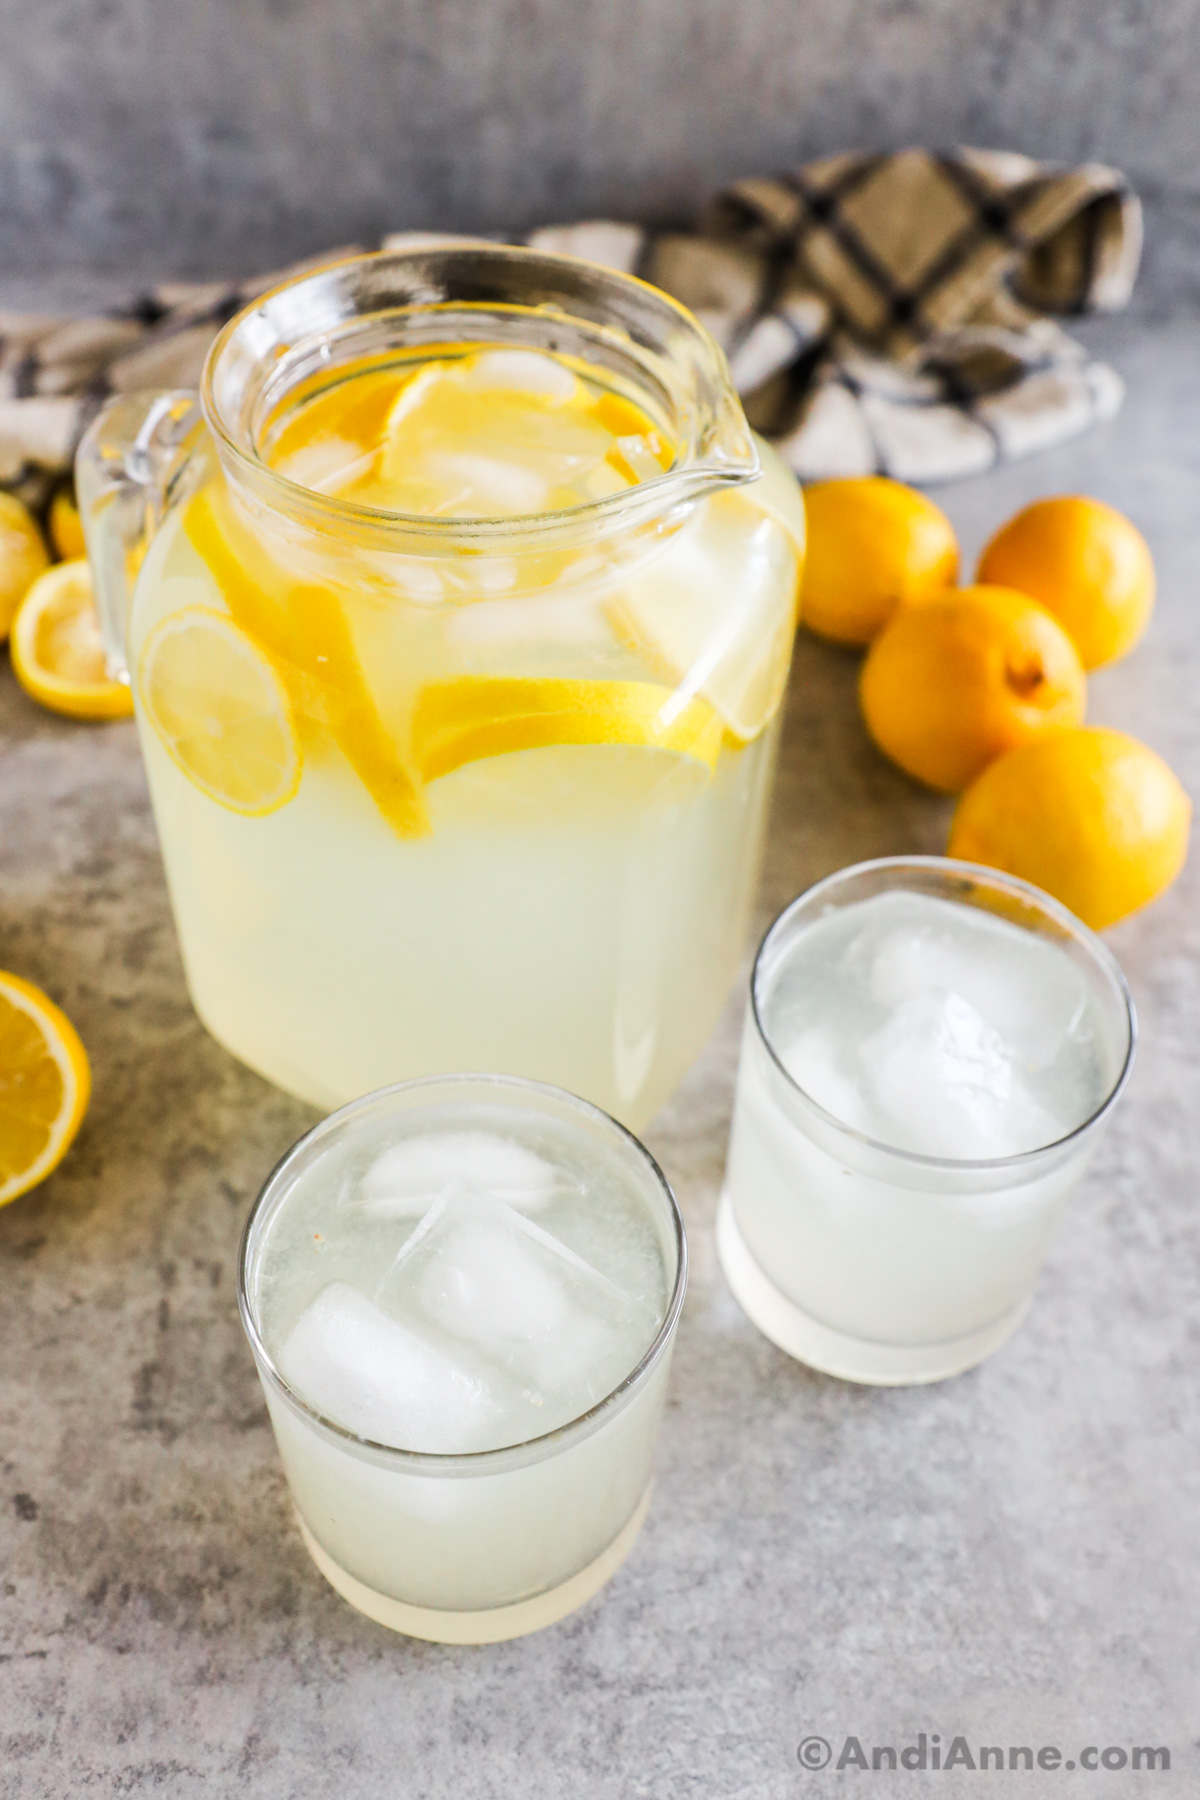 A 1.5 litre glass pitcher full of lemonade with lemon slices behind two glasses of lemonade with ice cubes. Whole and sliced lemons in background.